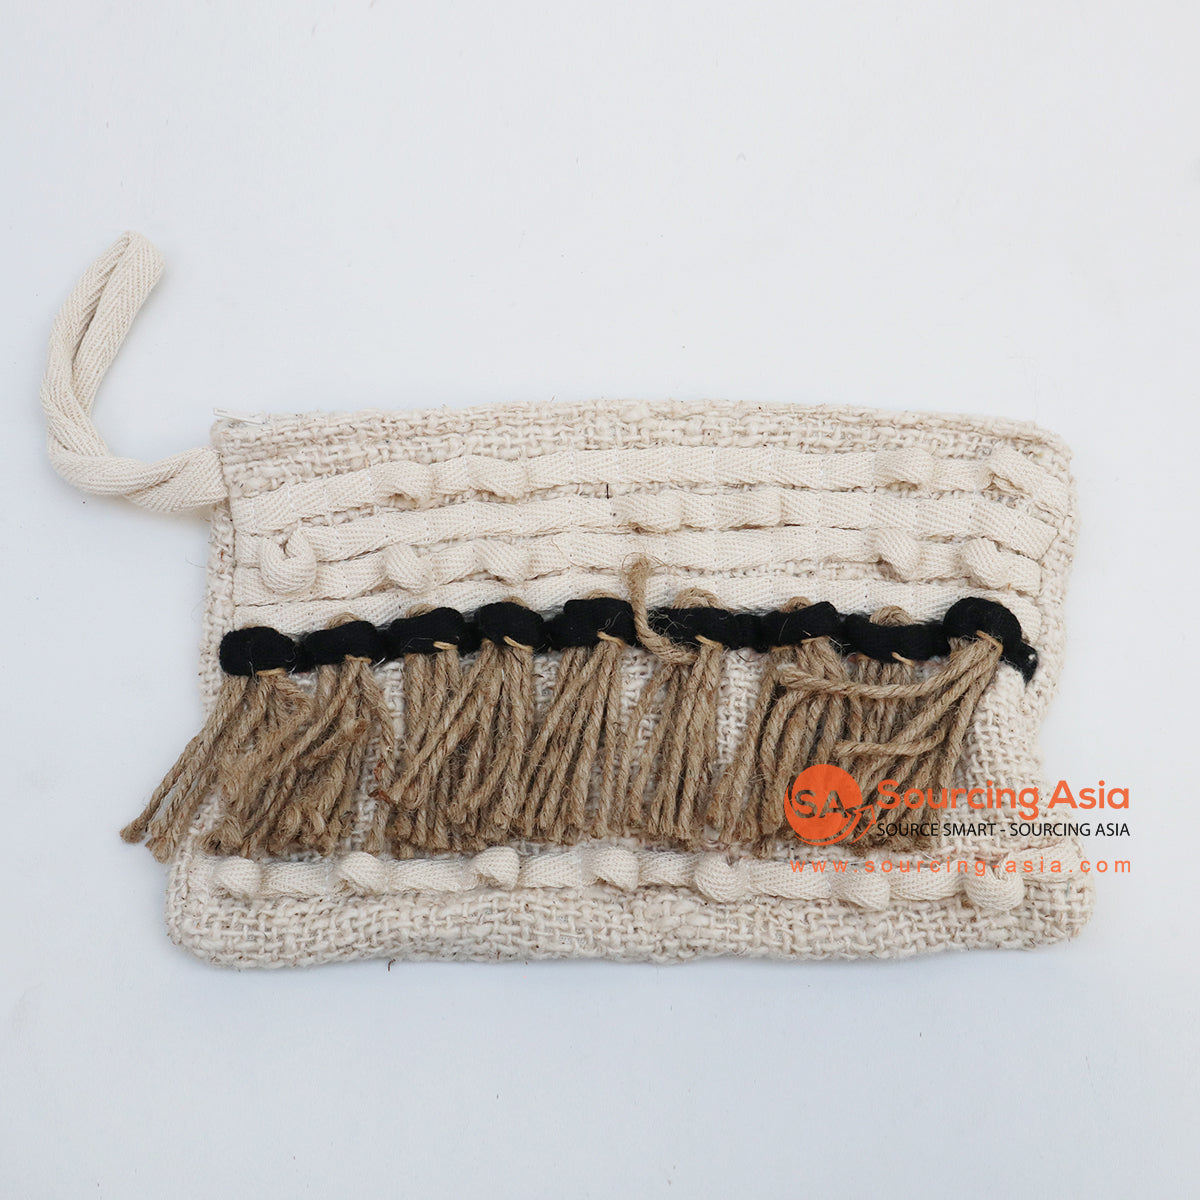 EXAC004-5 MULTICOLOR BEADS AND SHELL PATTERNED WHITE MACRAME PURSE